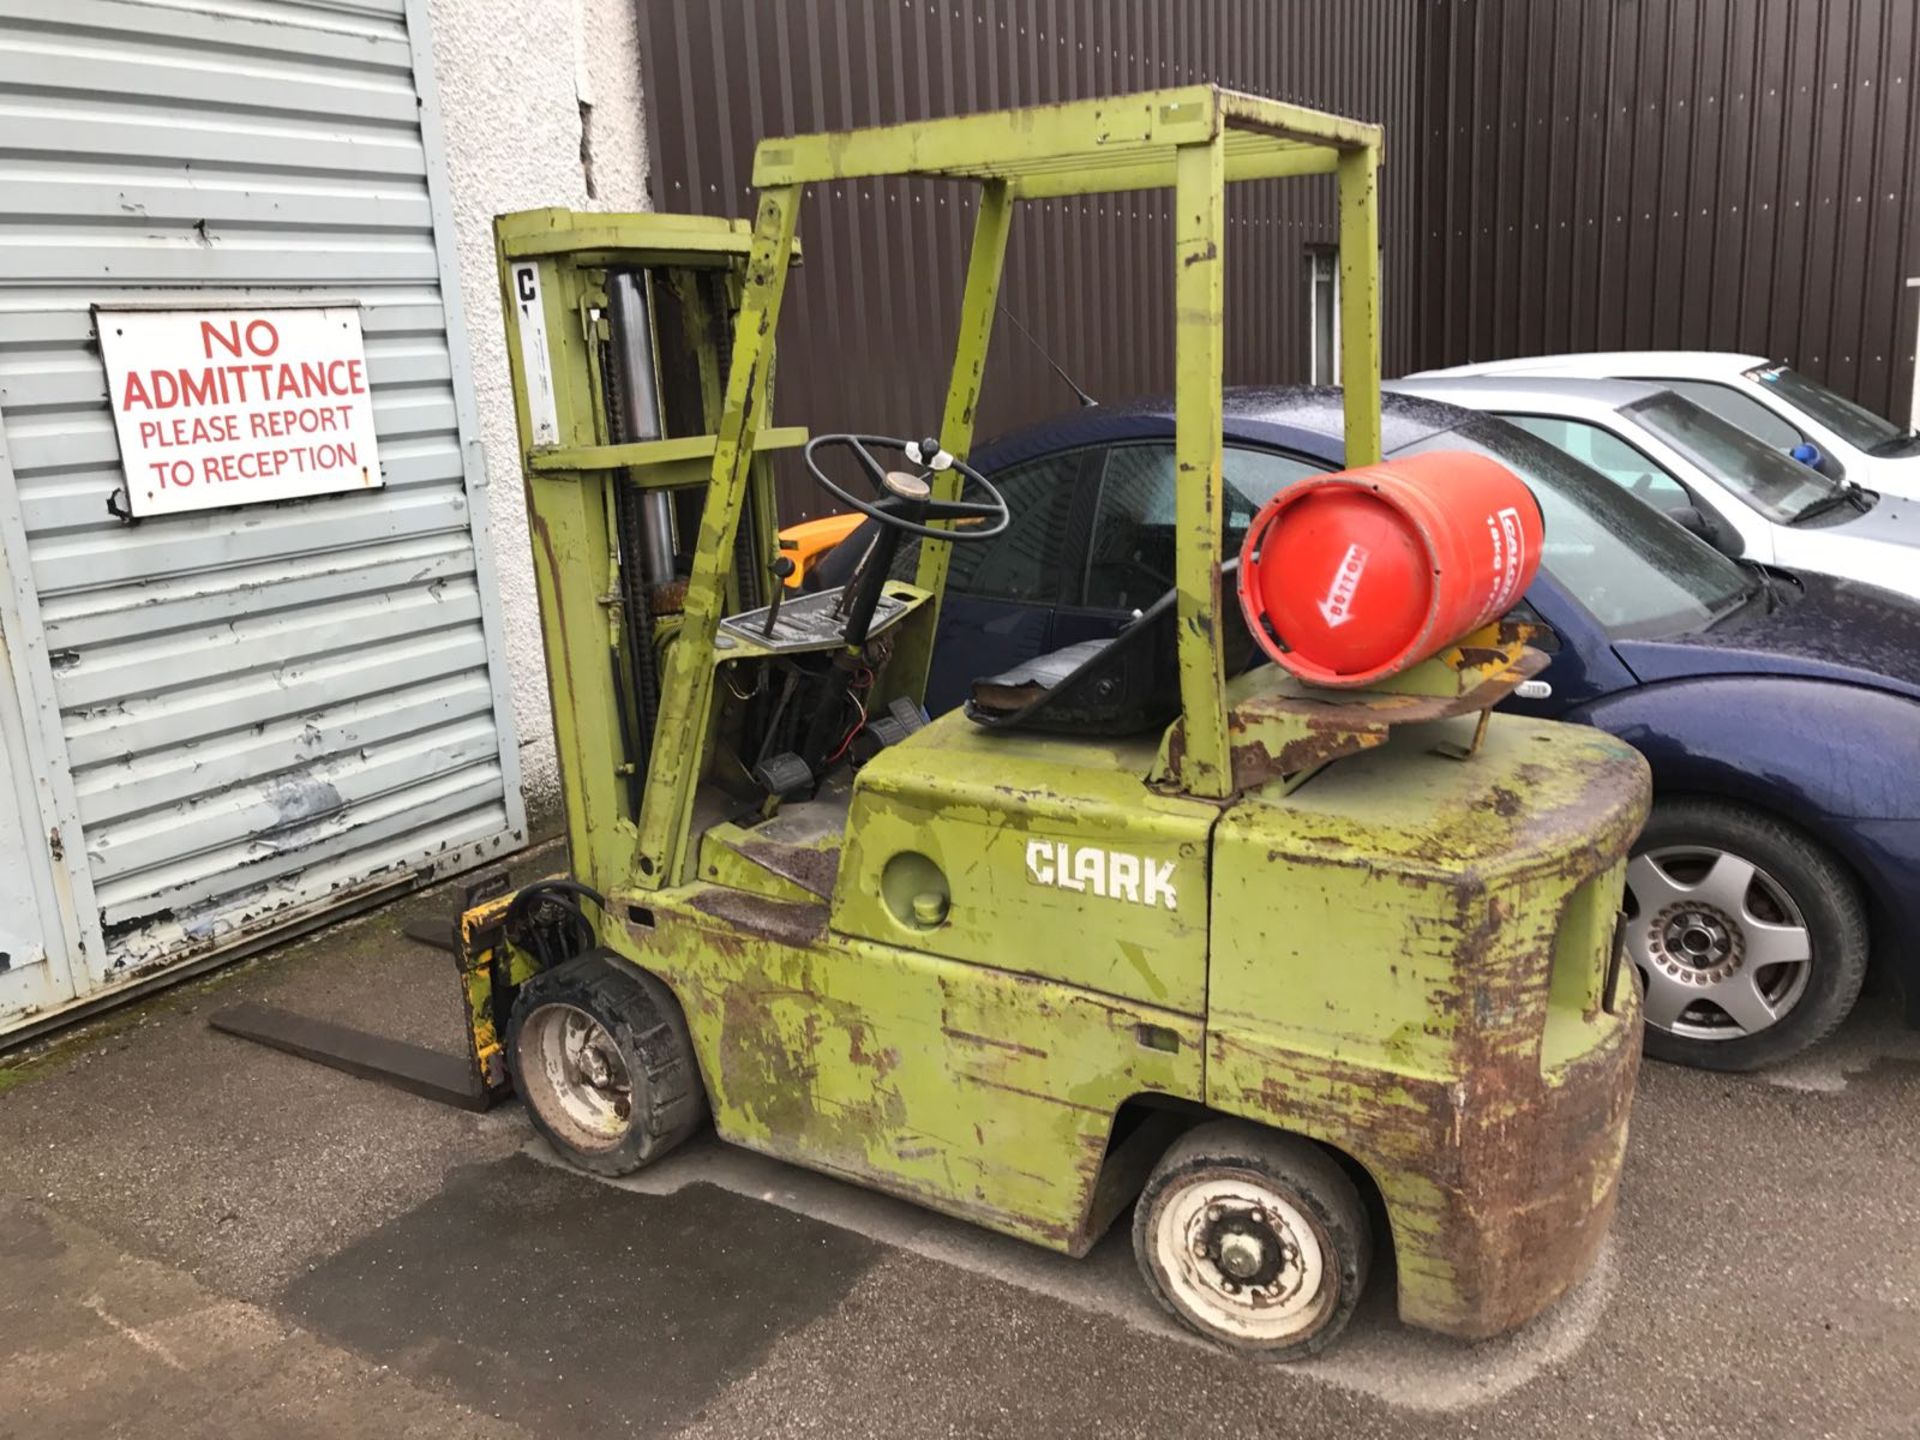 2 TONNE CLARK C500 55 FORKLIFT WITH SIDE SHIFT - SELLING AS NON RUNNER, WILL NOT START   NO